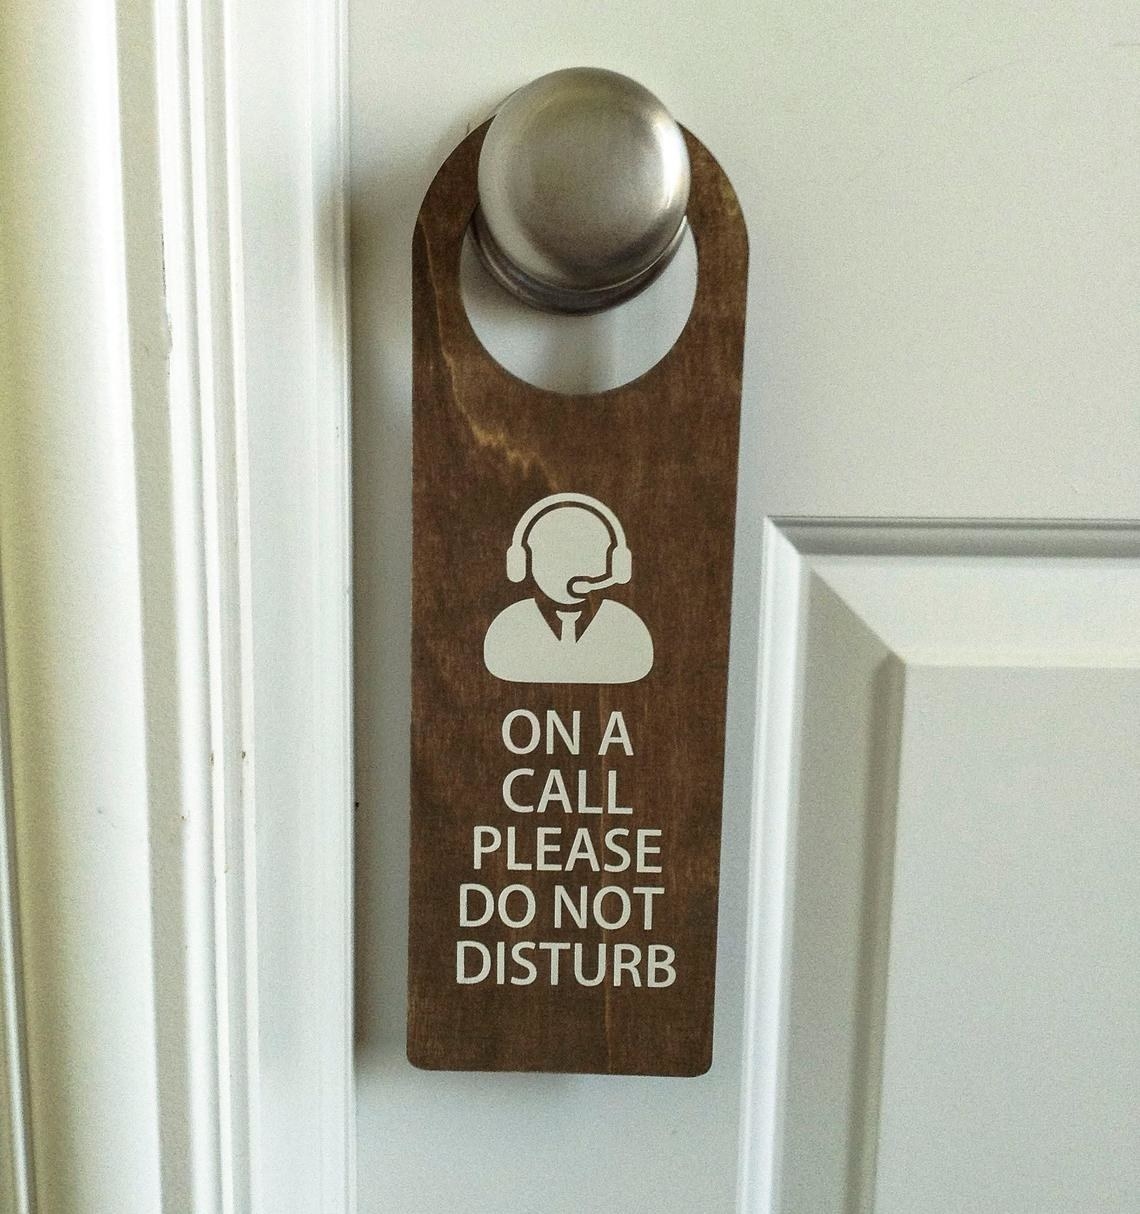 The sign on a door knob